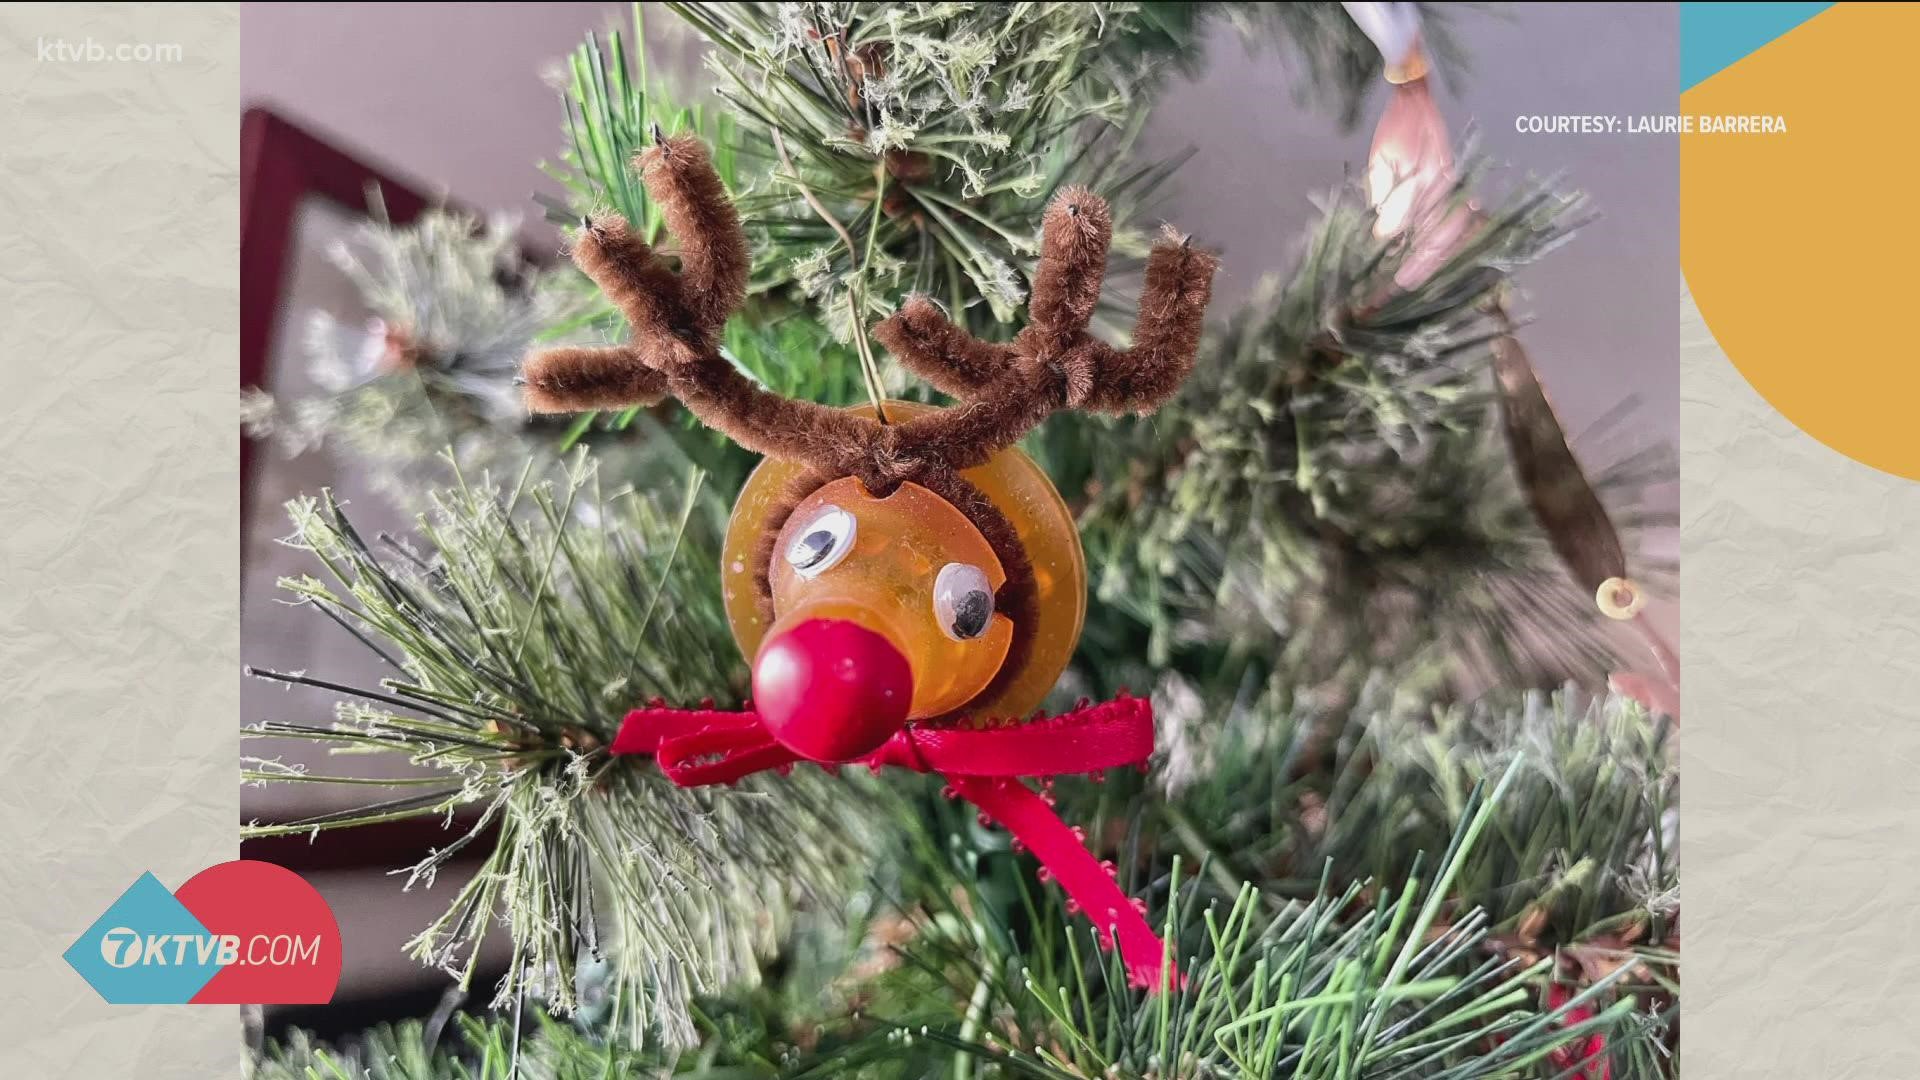 Viewers sent in photos of their weirdest and ugliest holiday decorations and we reviewed them!